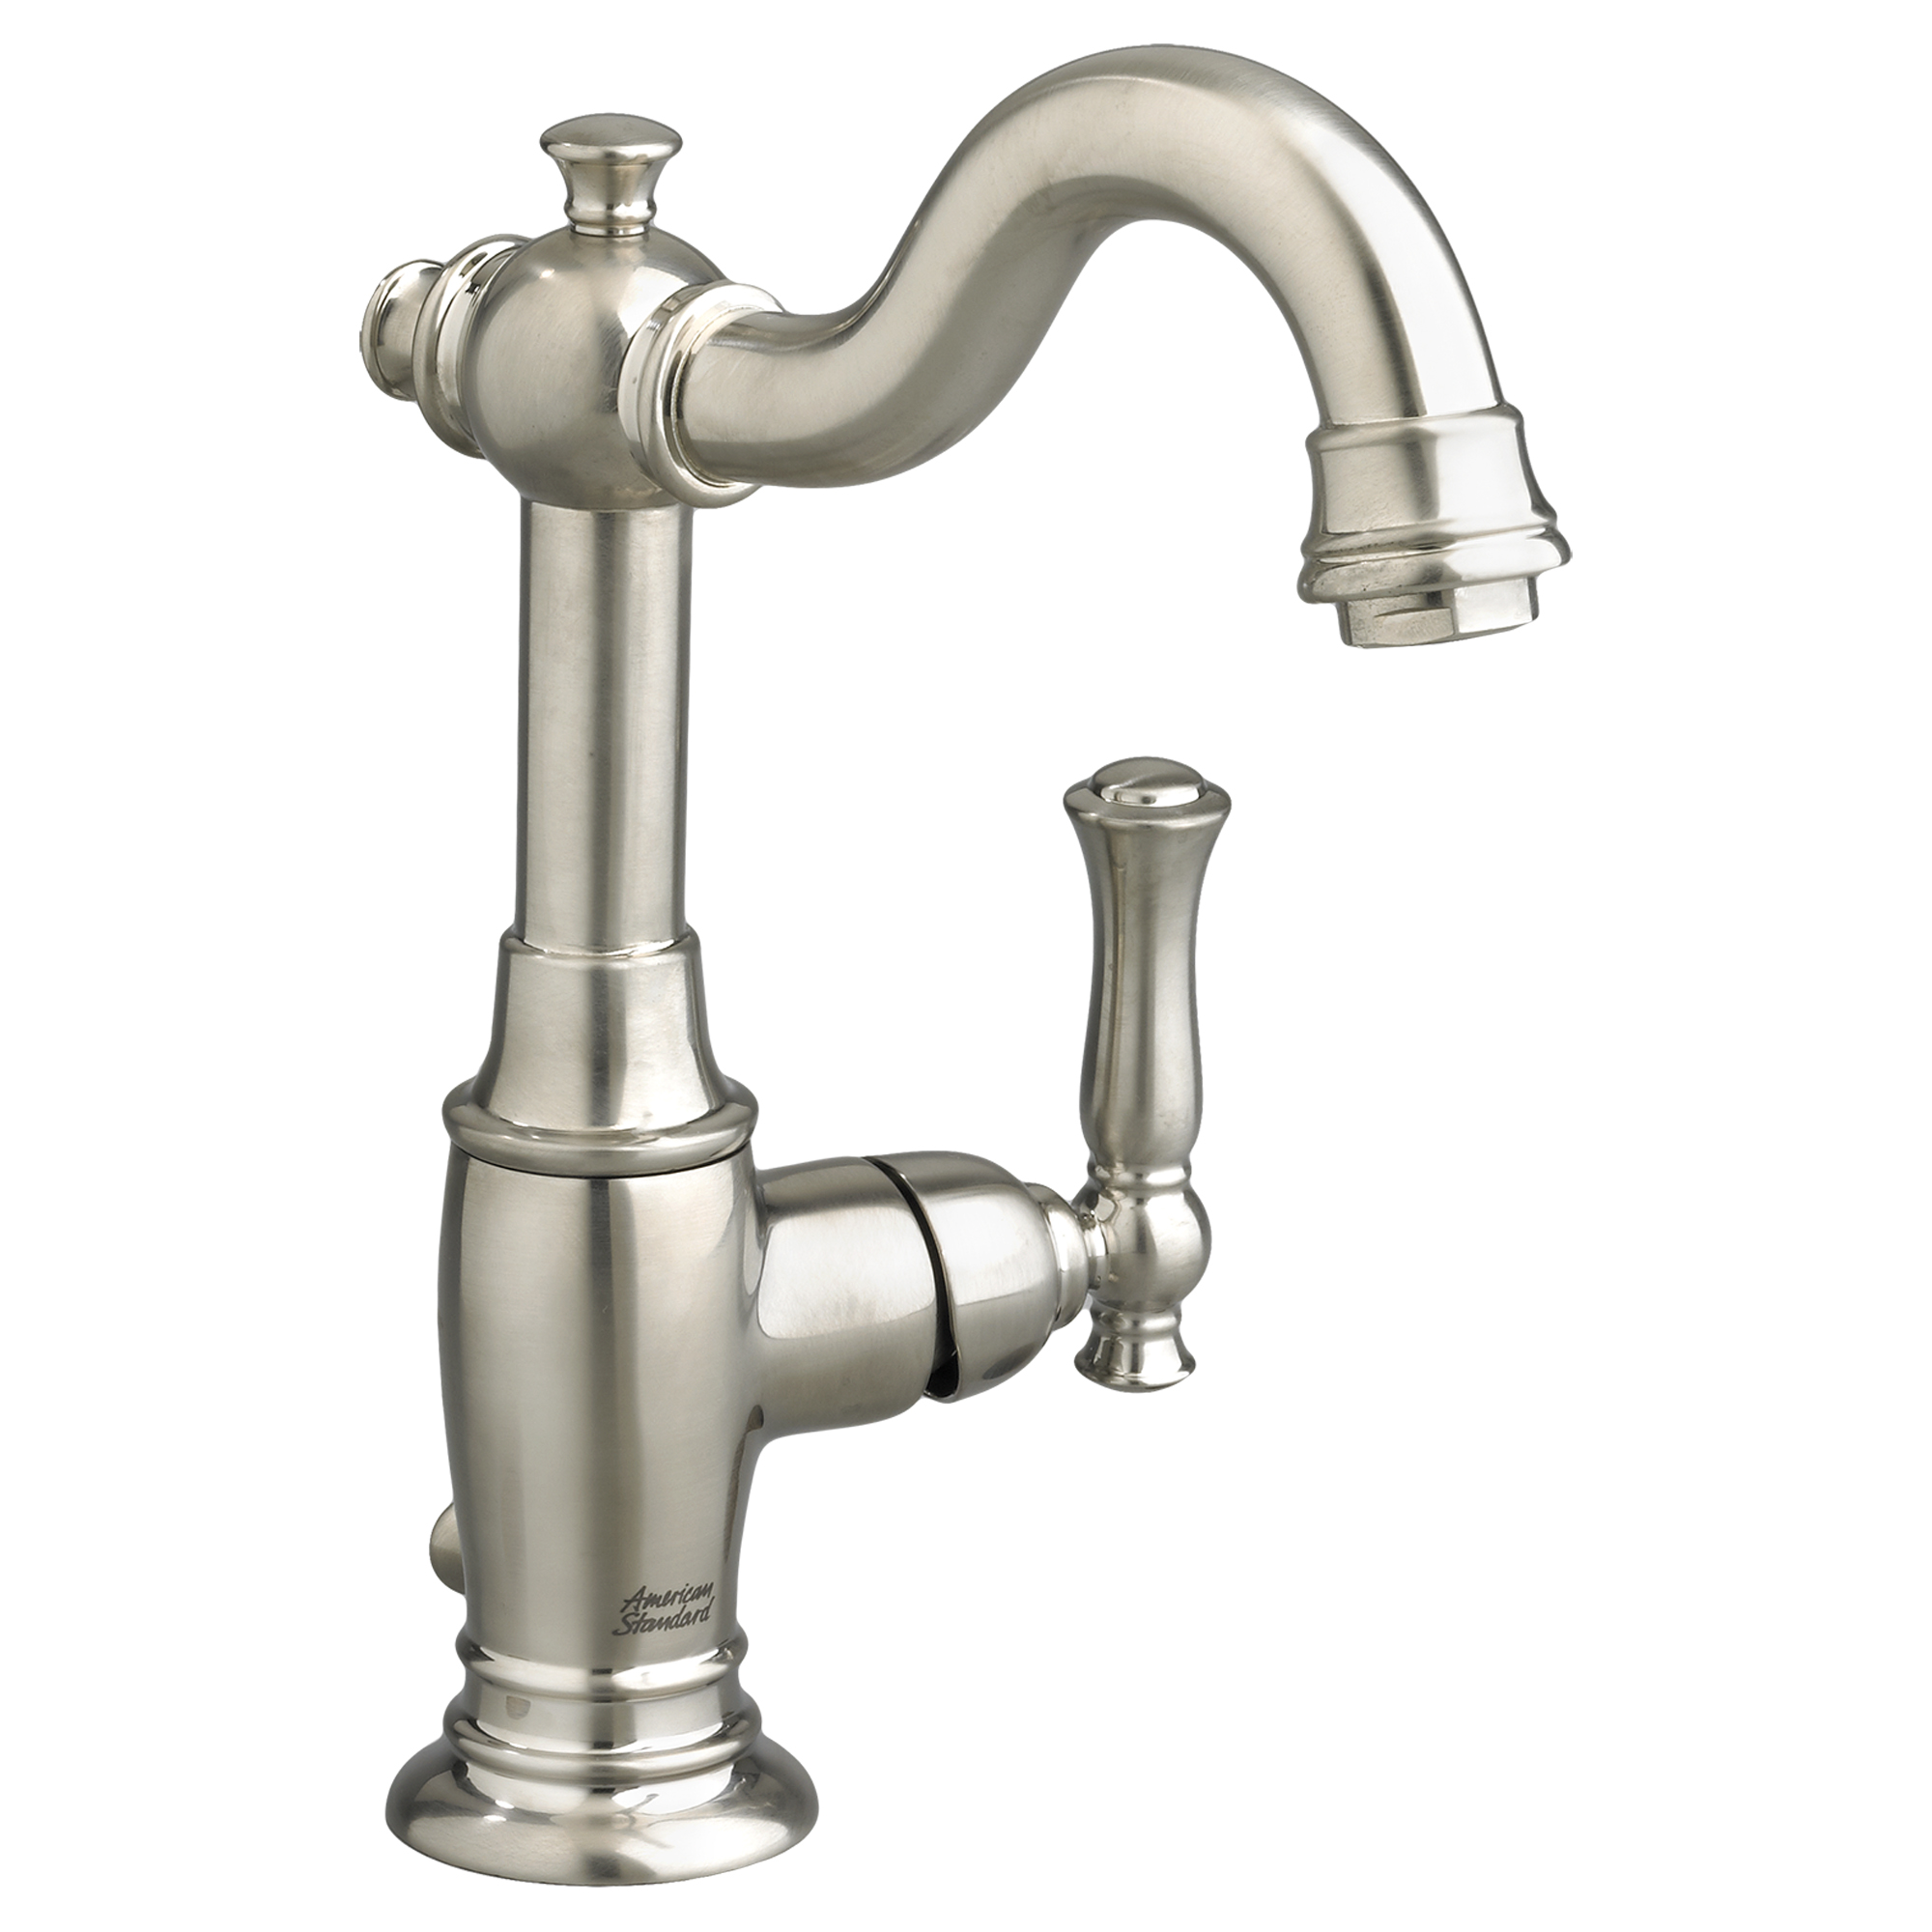 Quentin Single Hole Lavatory Faucet in Brushed Nickel